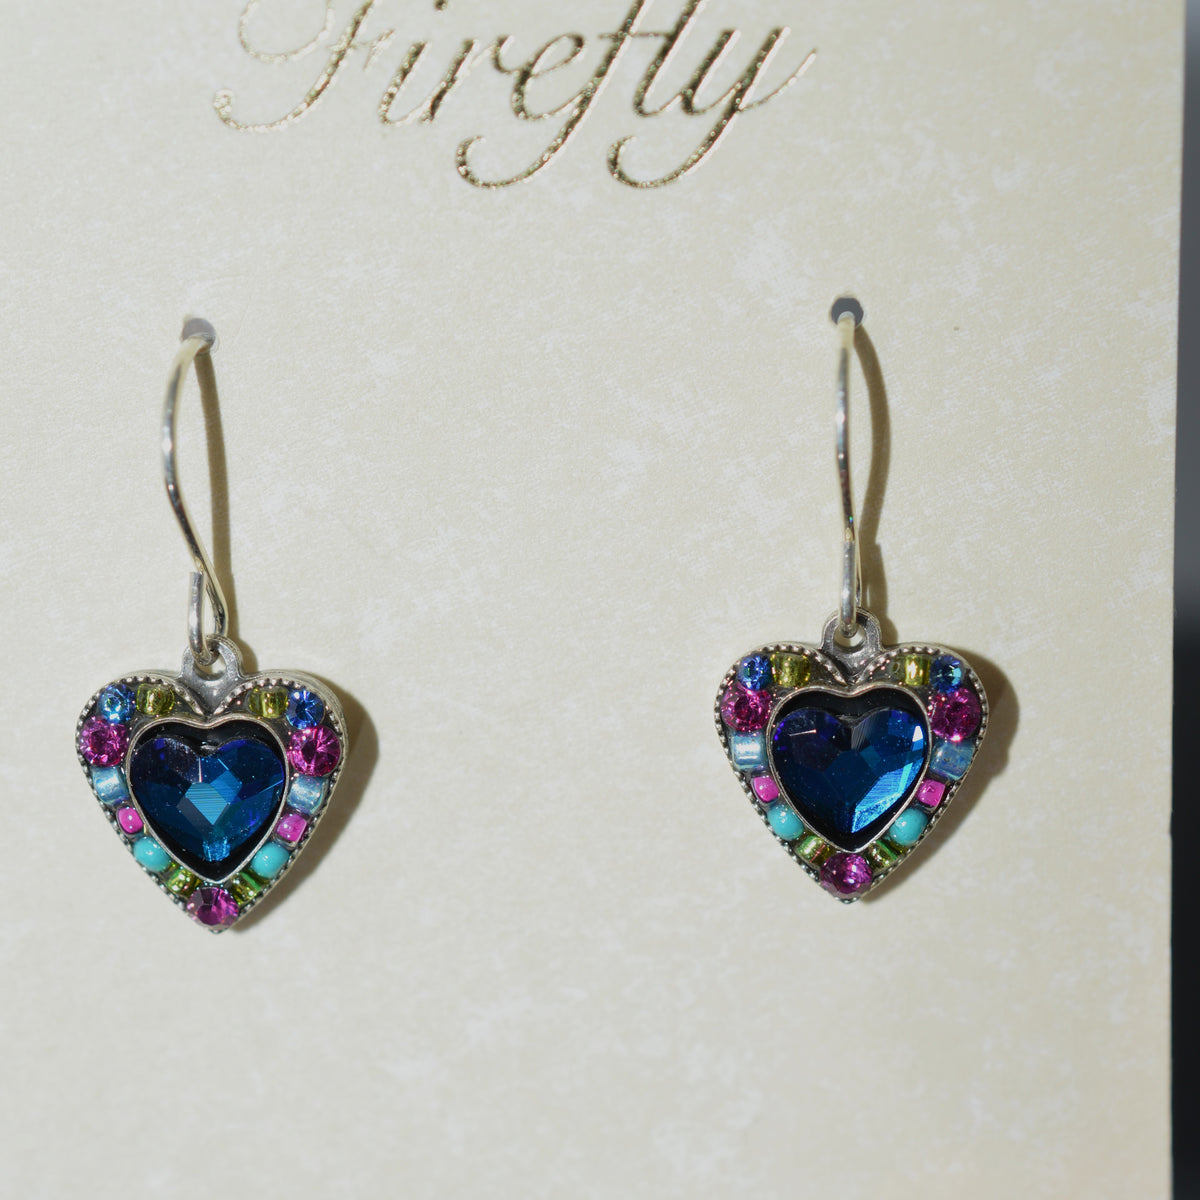 Antique Silver Plated Heart Earrings With Bermuda Blue Crystals by Firefly